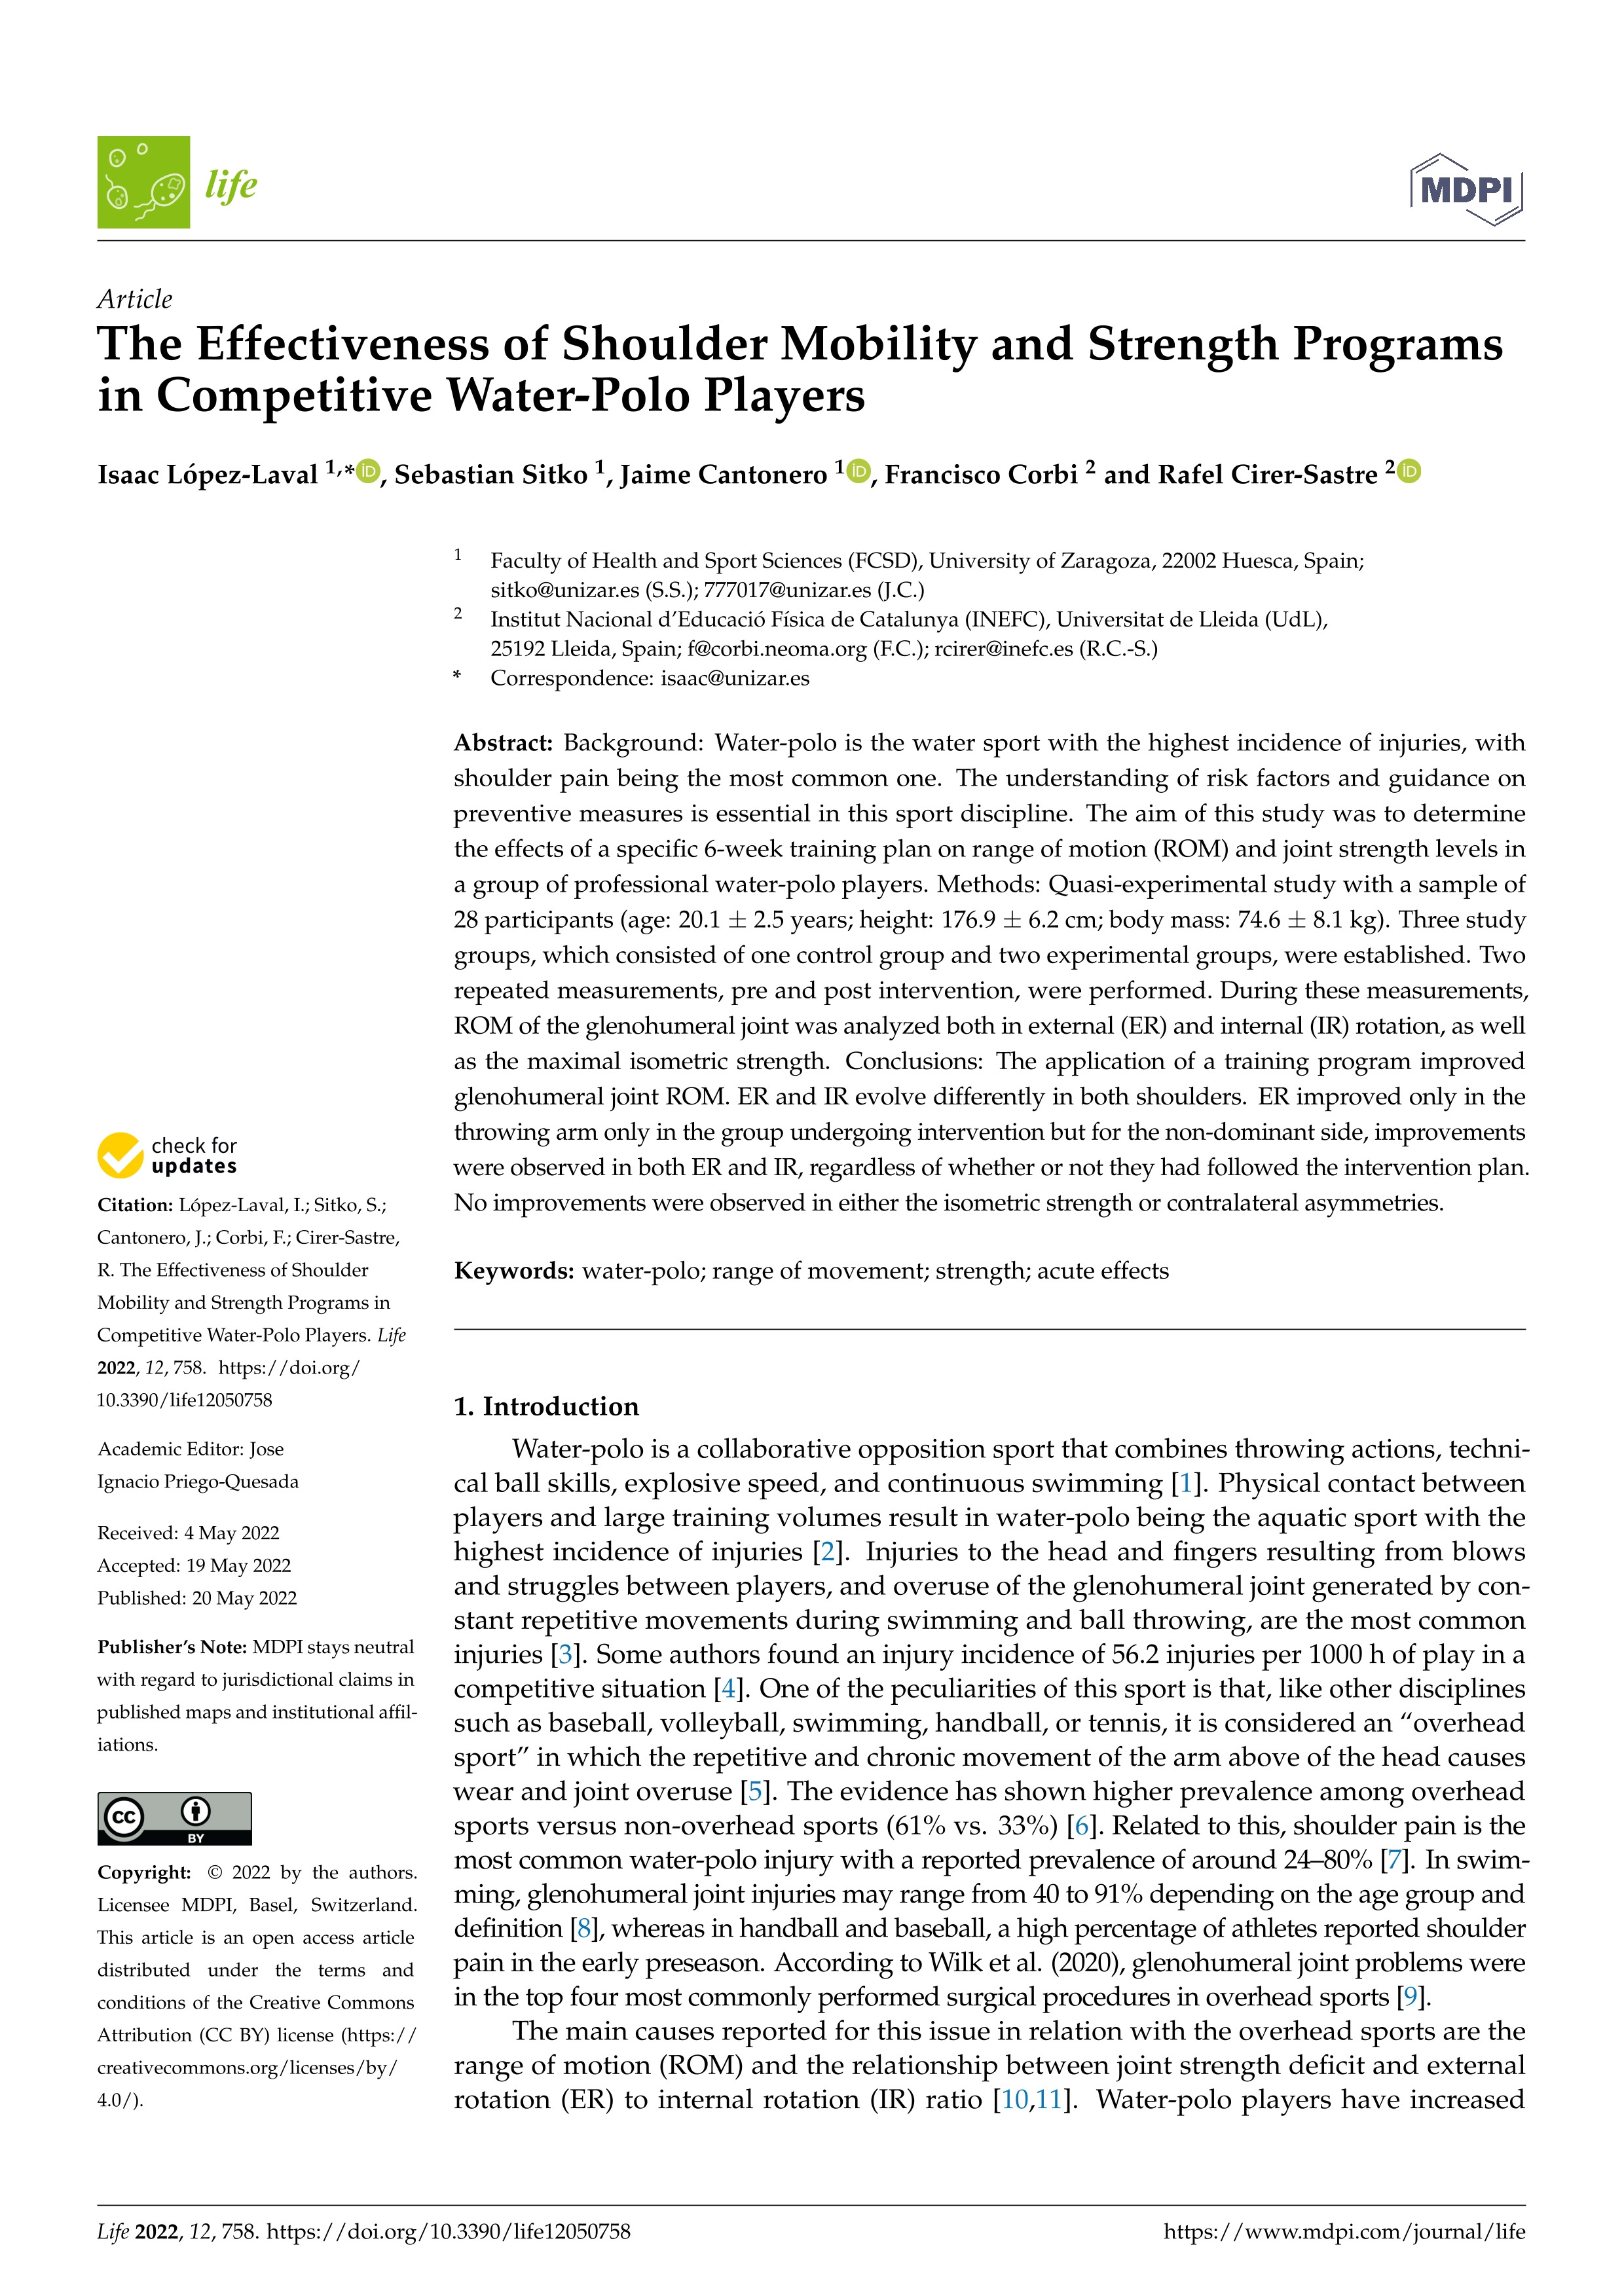 The effectiveness of shoulder mobility and strength programs in competitive water-polo players